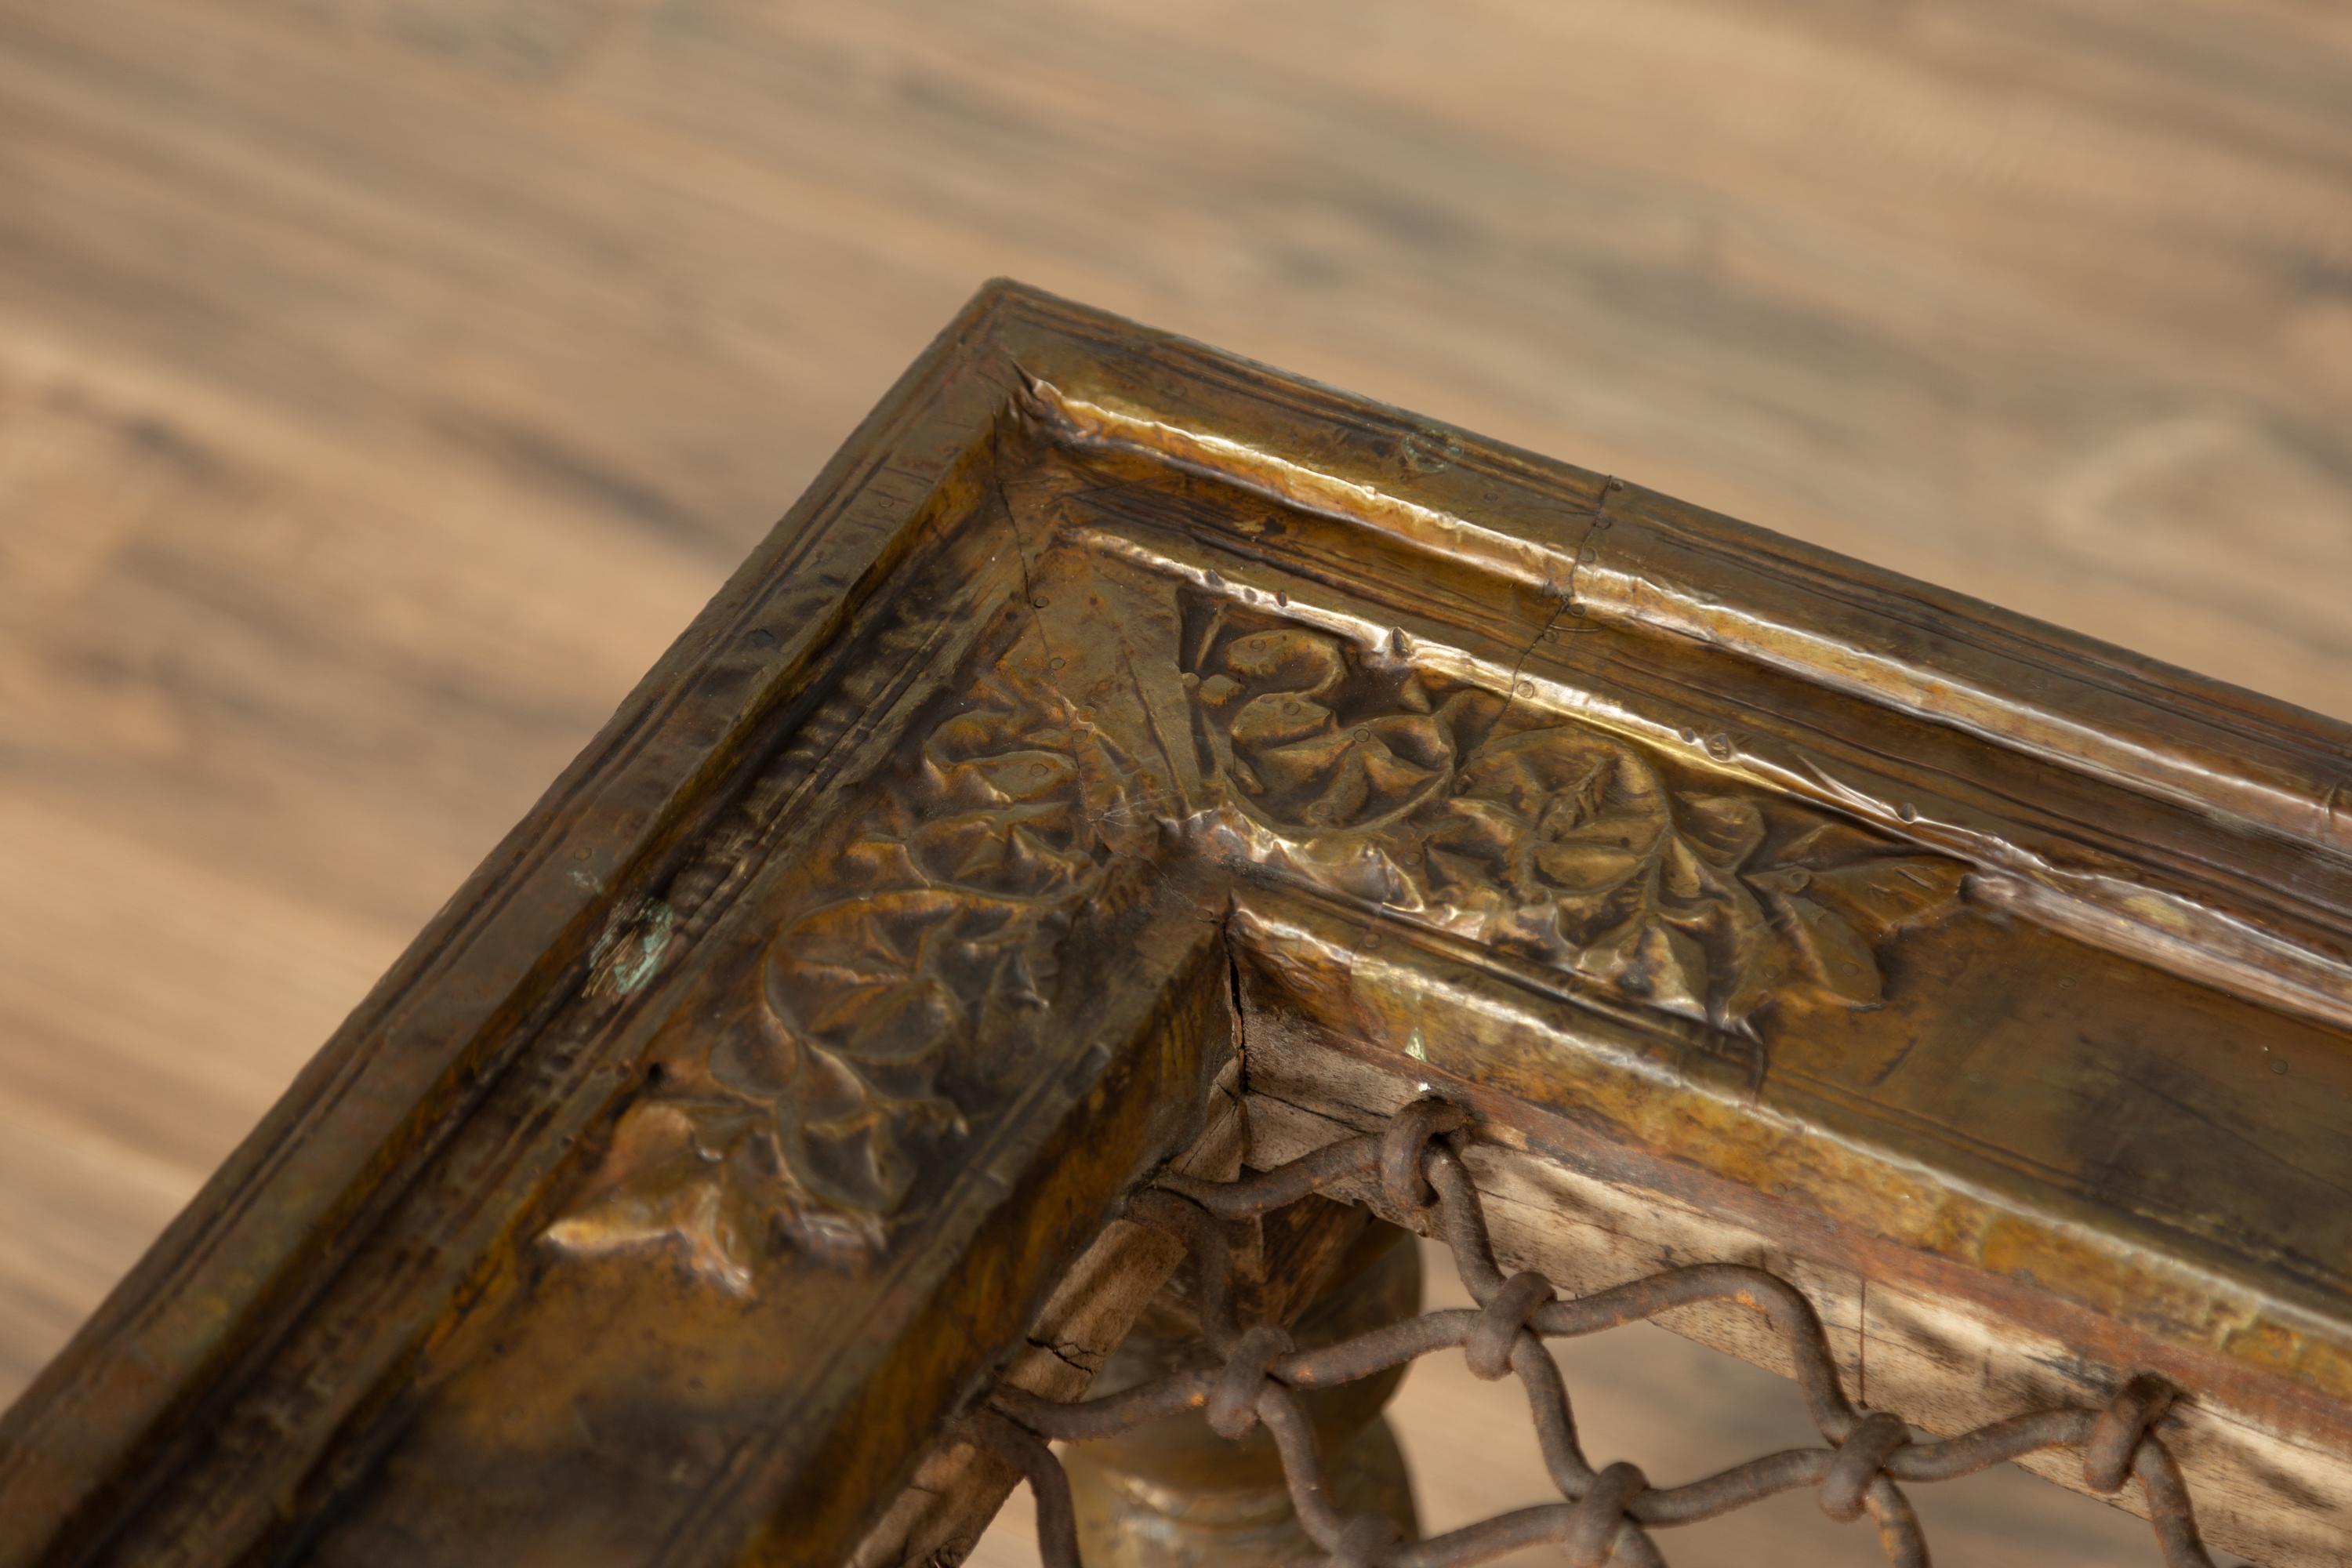 20th Century Antique Indian Window Grate Made into a Coffee Table with Copper Sheathing